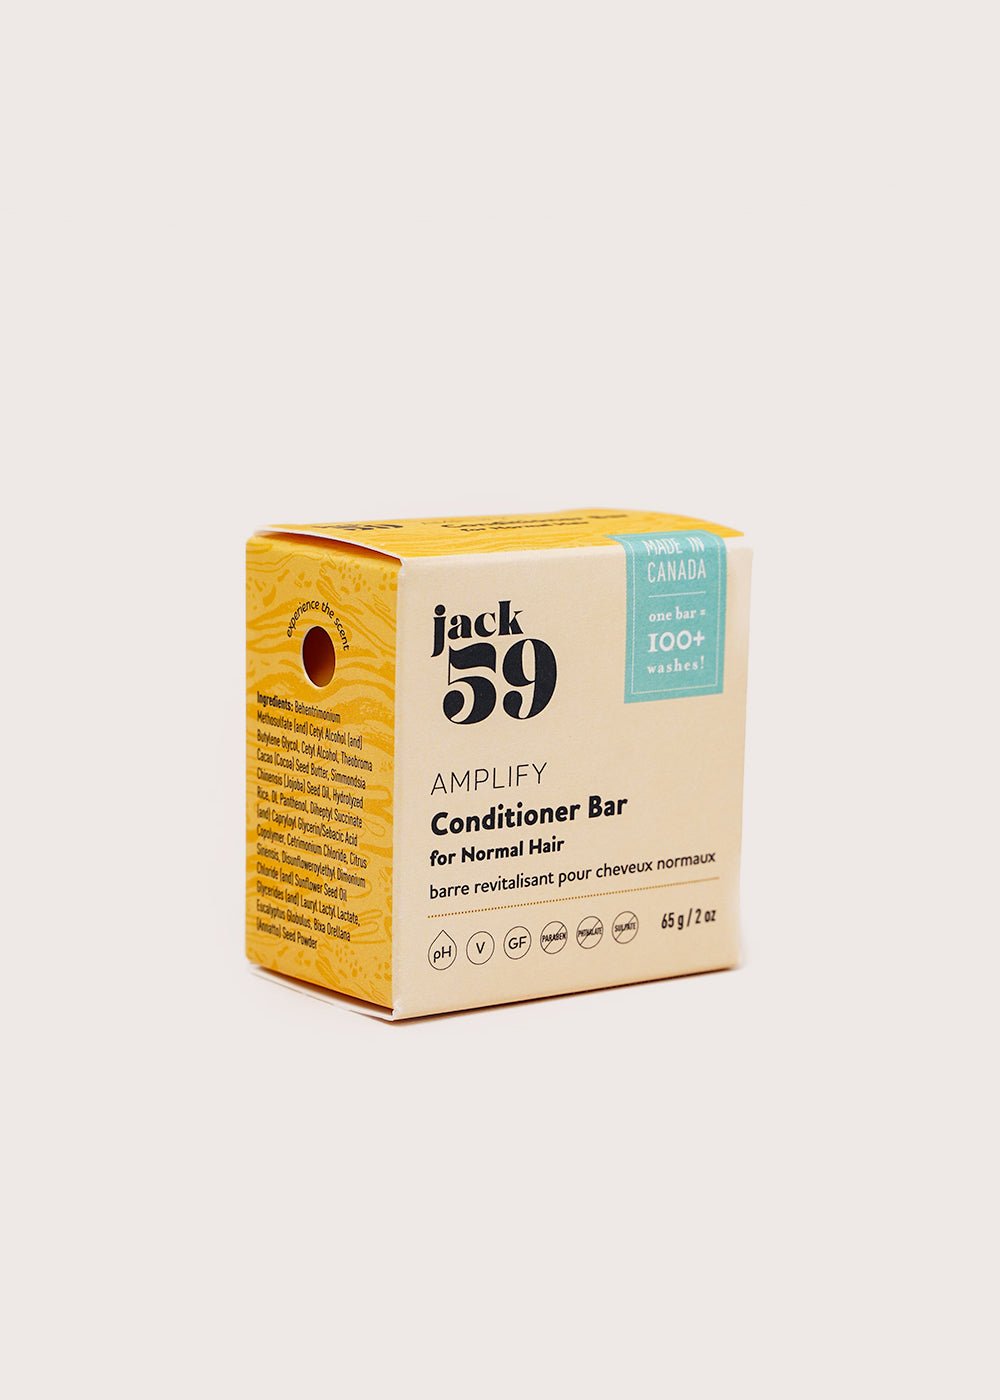 Jack59 Amplify Conditioner Bar - New Classics Studios Sustainable Ethical Fashion Canada